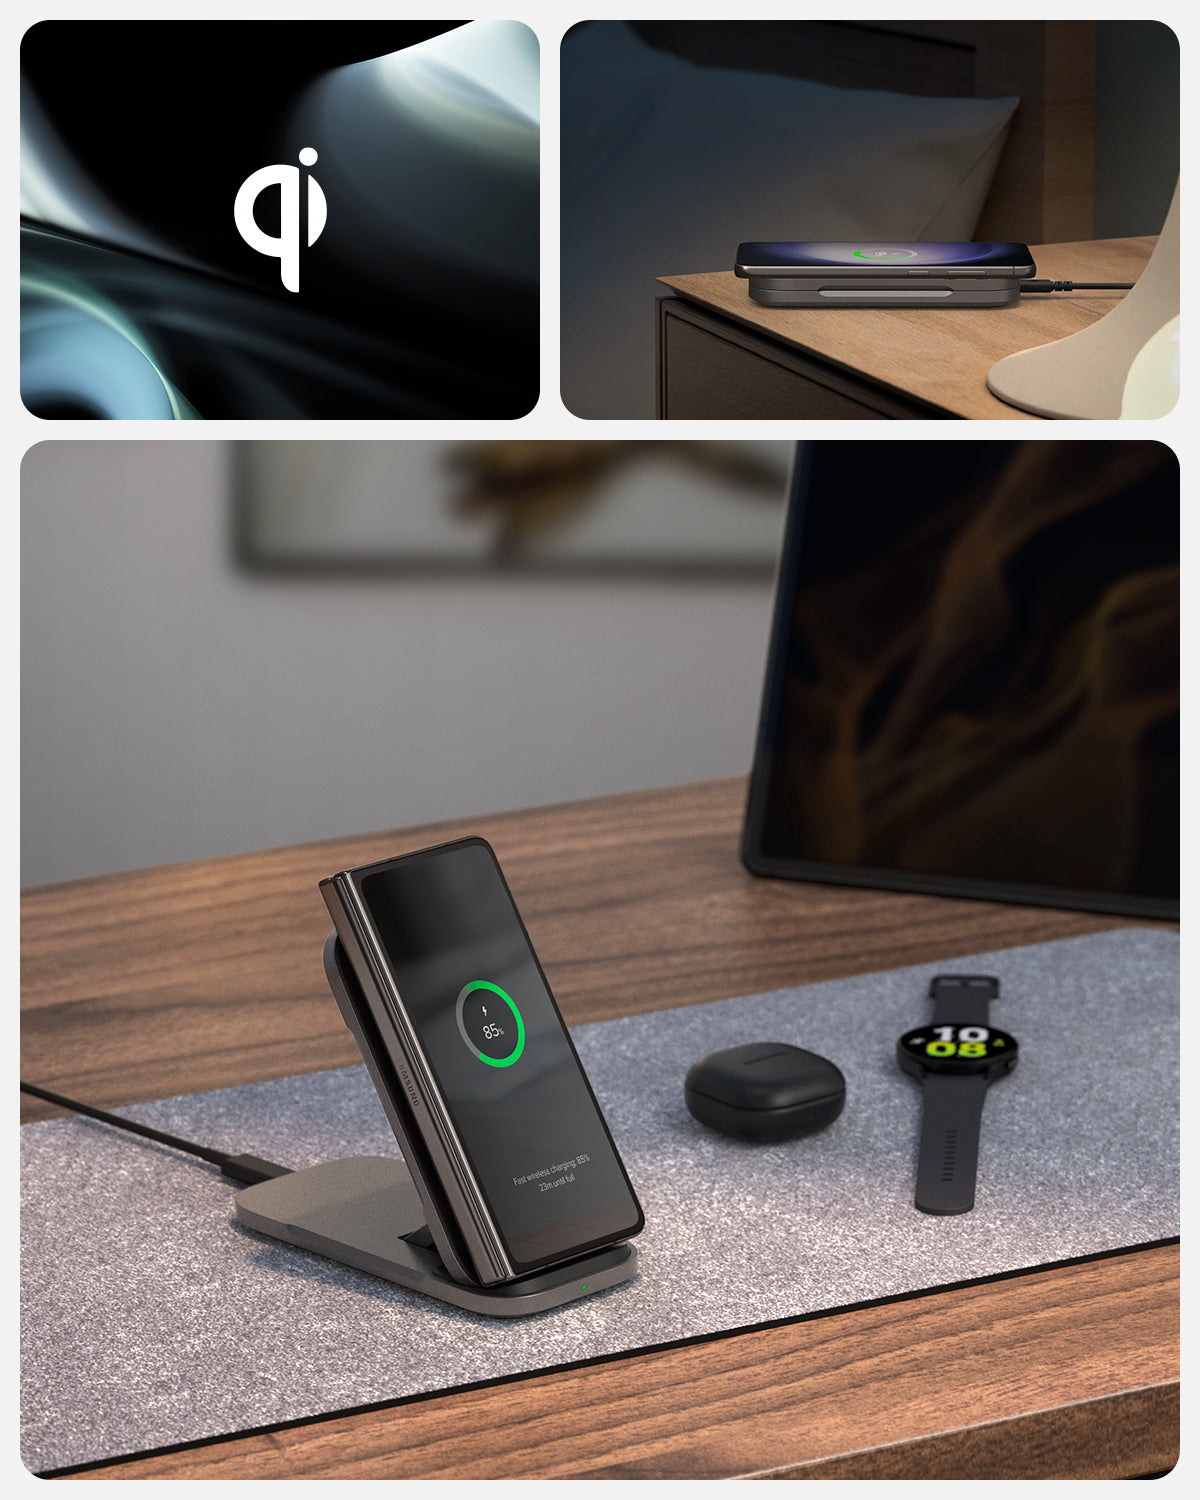 ACH04622 - ArcField™ Flex 15W Wireless Charger PF2201 in Black showing the devices placed at different places